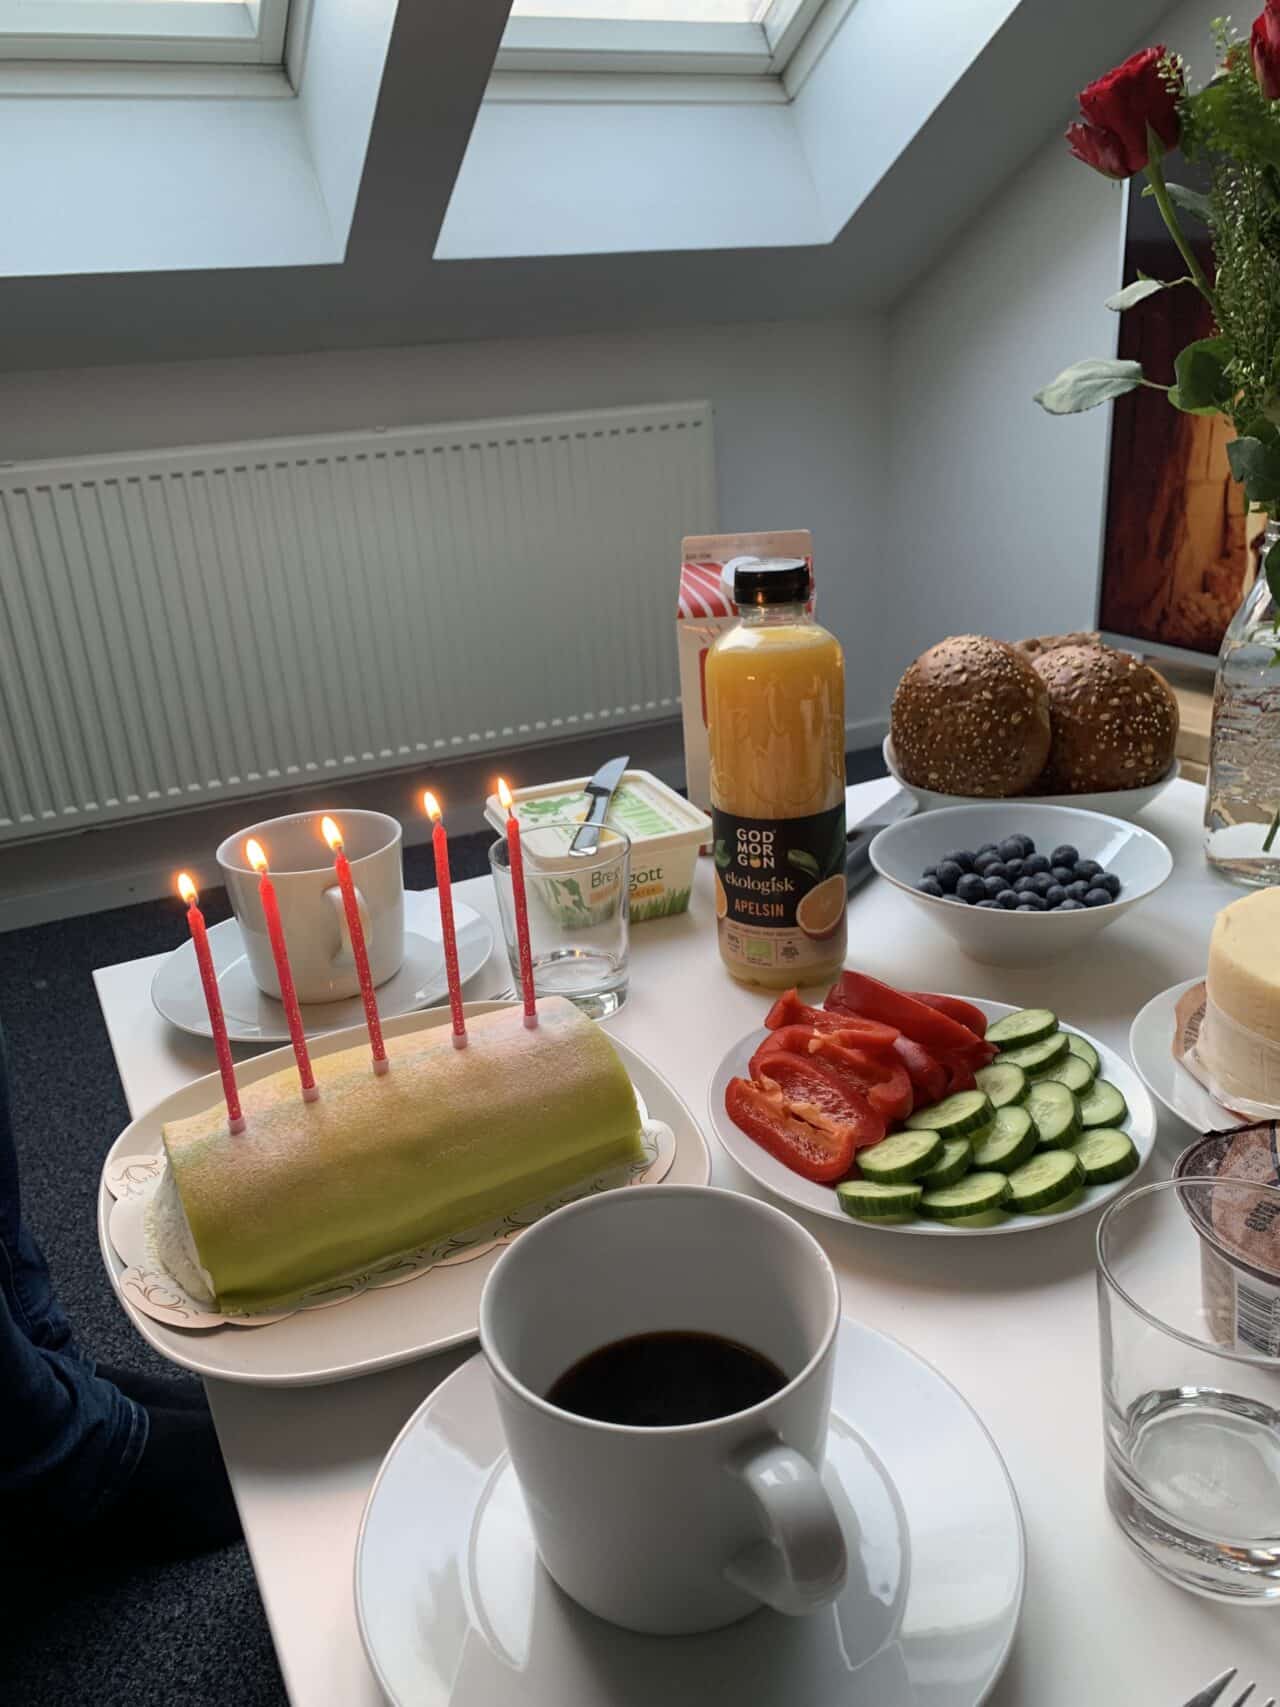 Breakfast Table With Lit Candles On A Marzipan Cake